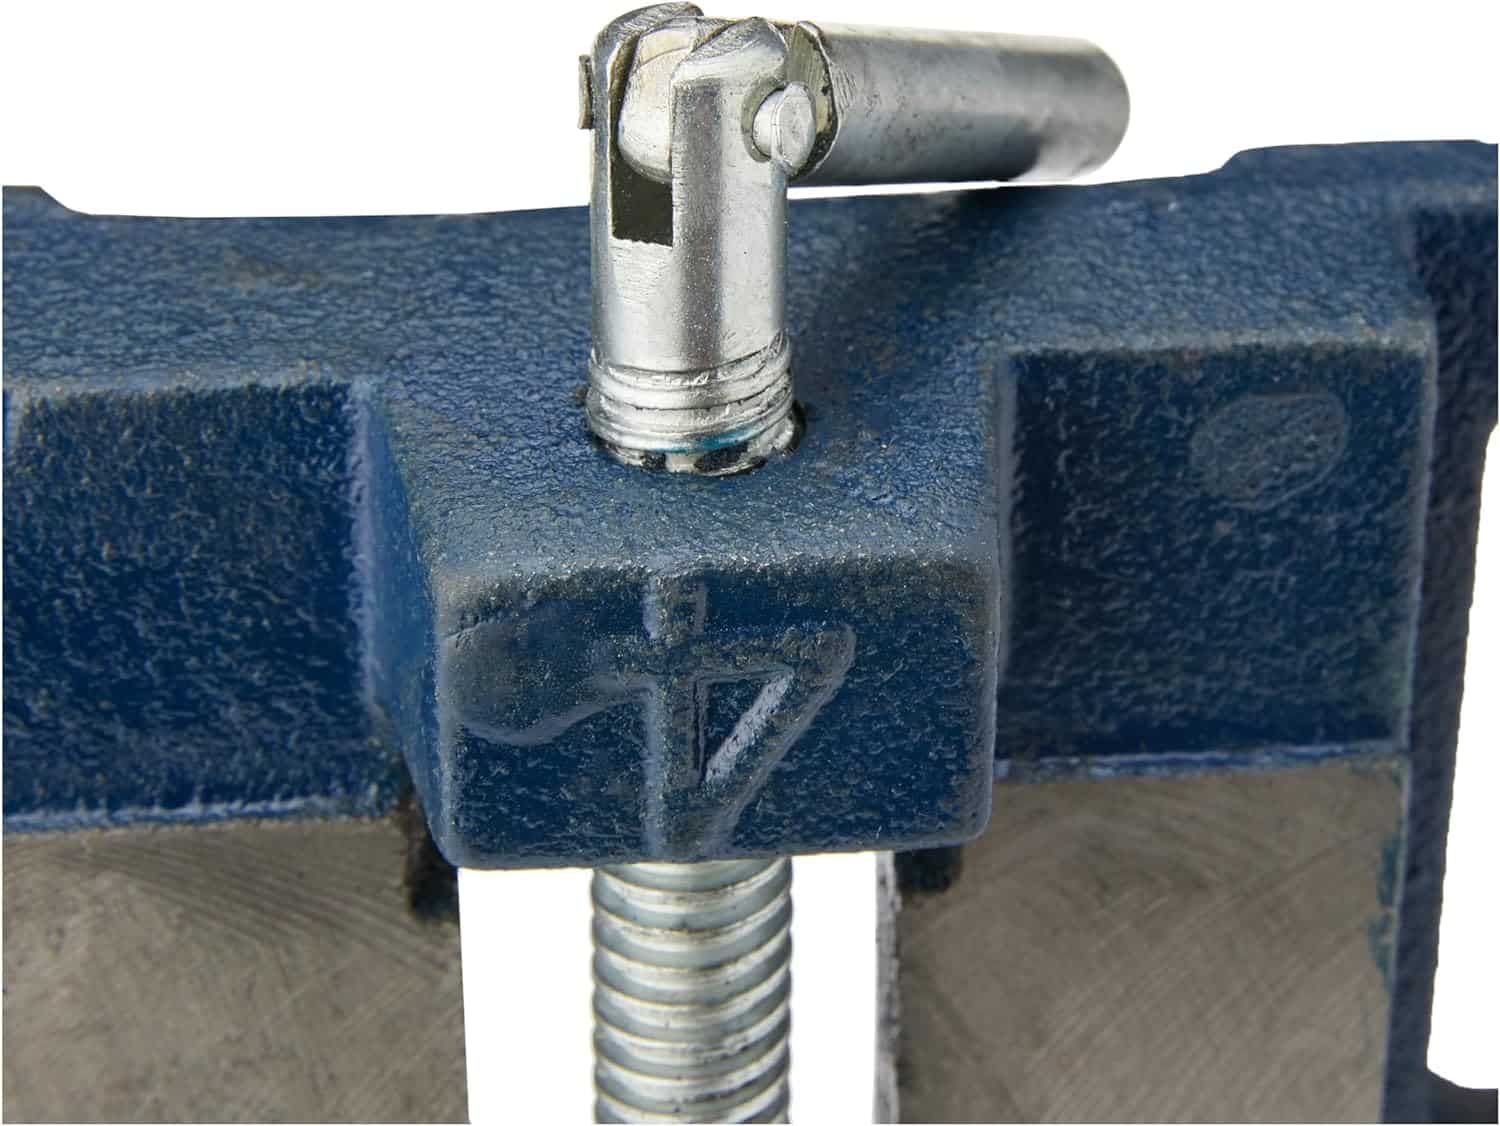 Toolzone VC019 4-Inch 100 mm Machine Vice for Pillar Drill/Hand Clamp 0934